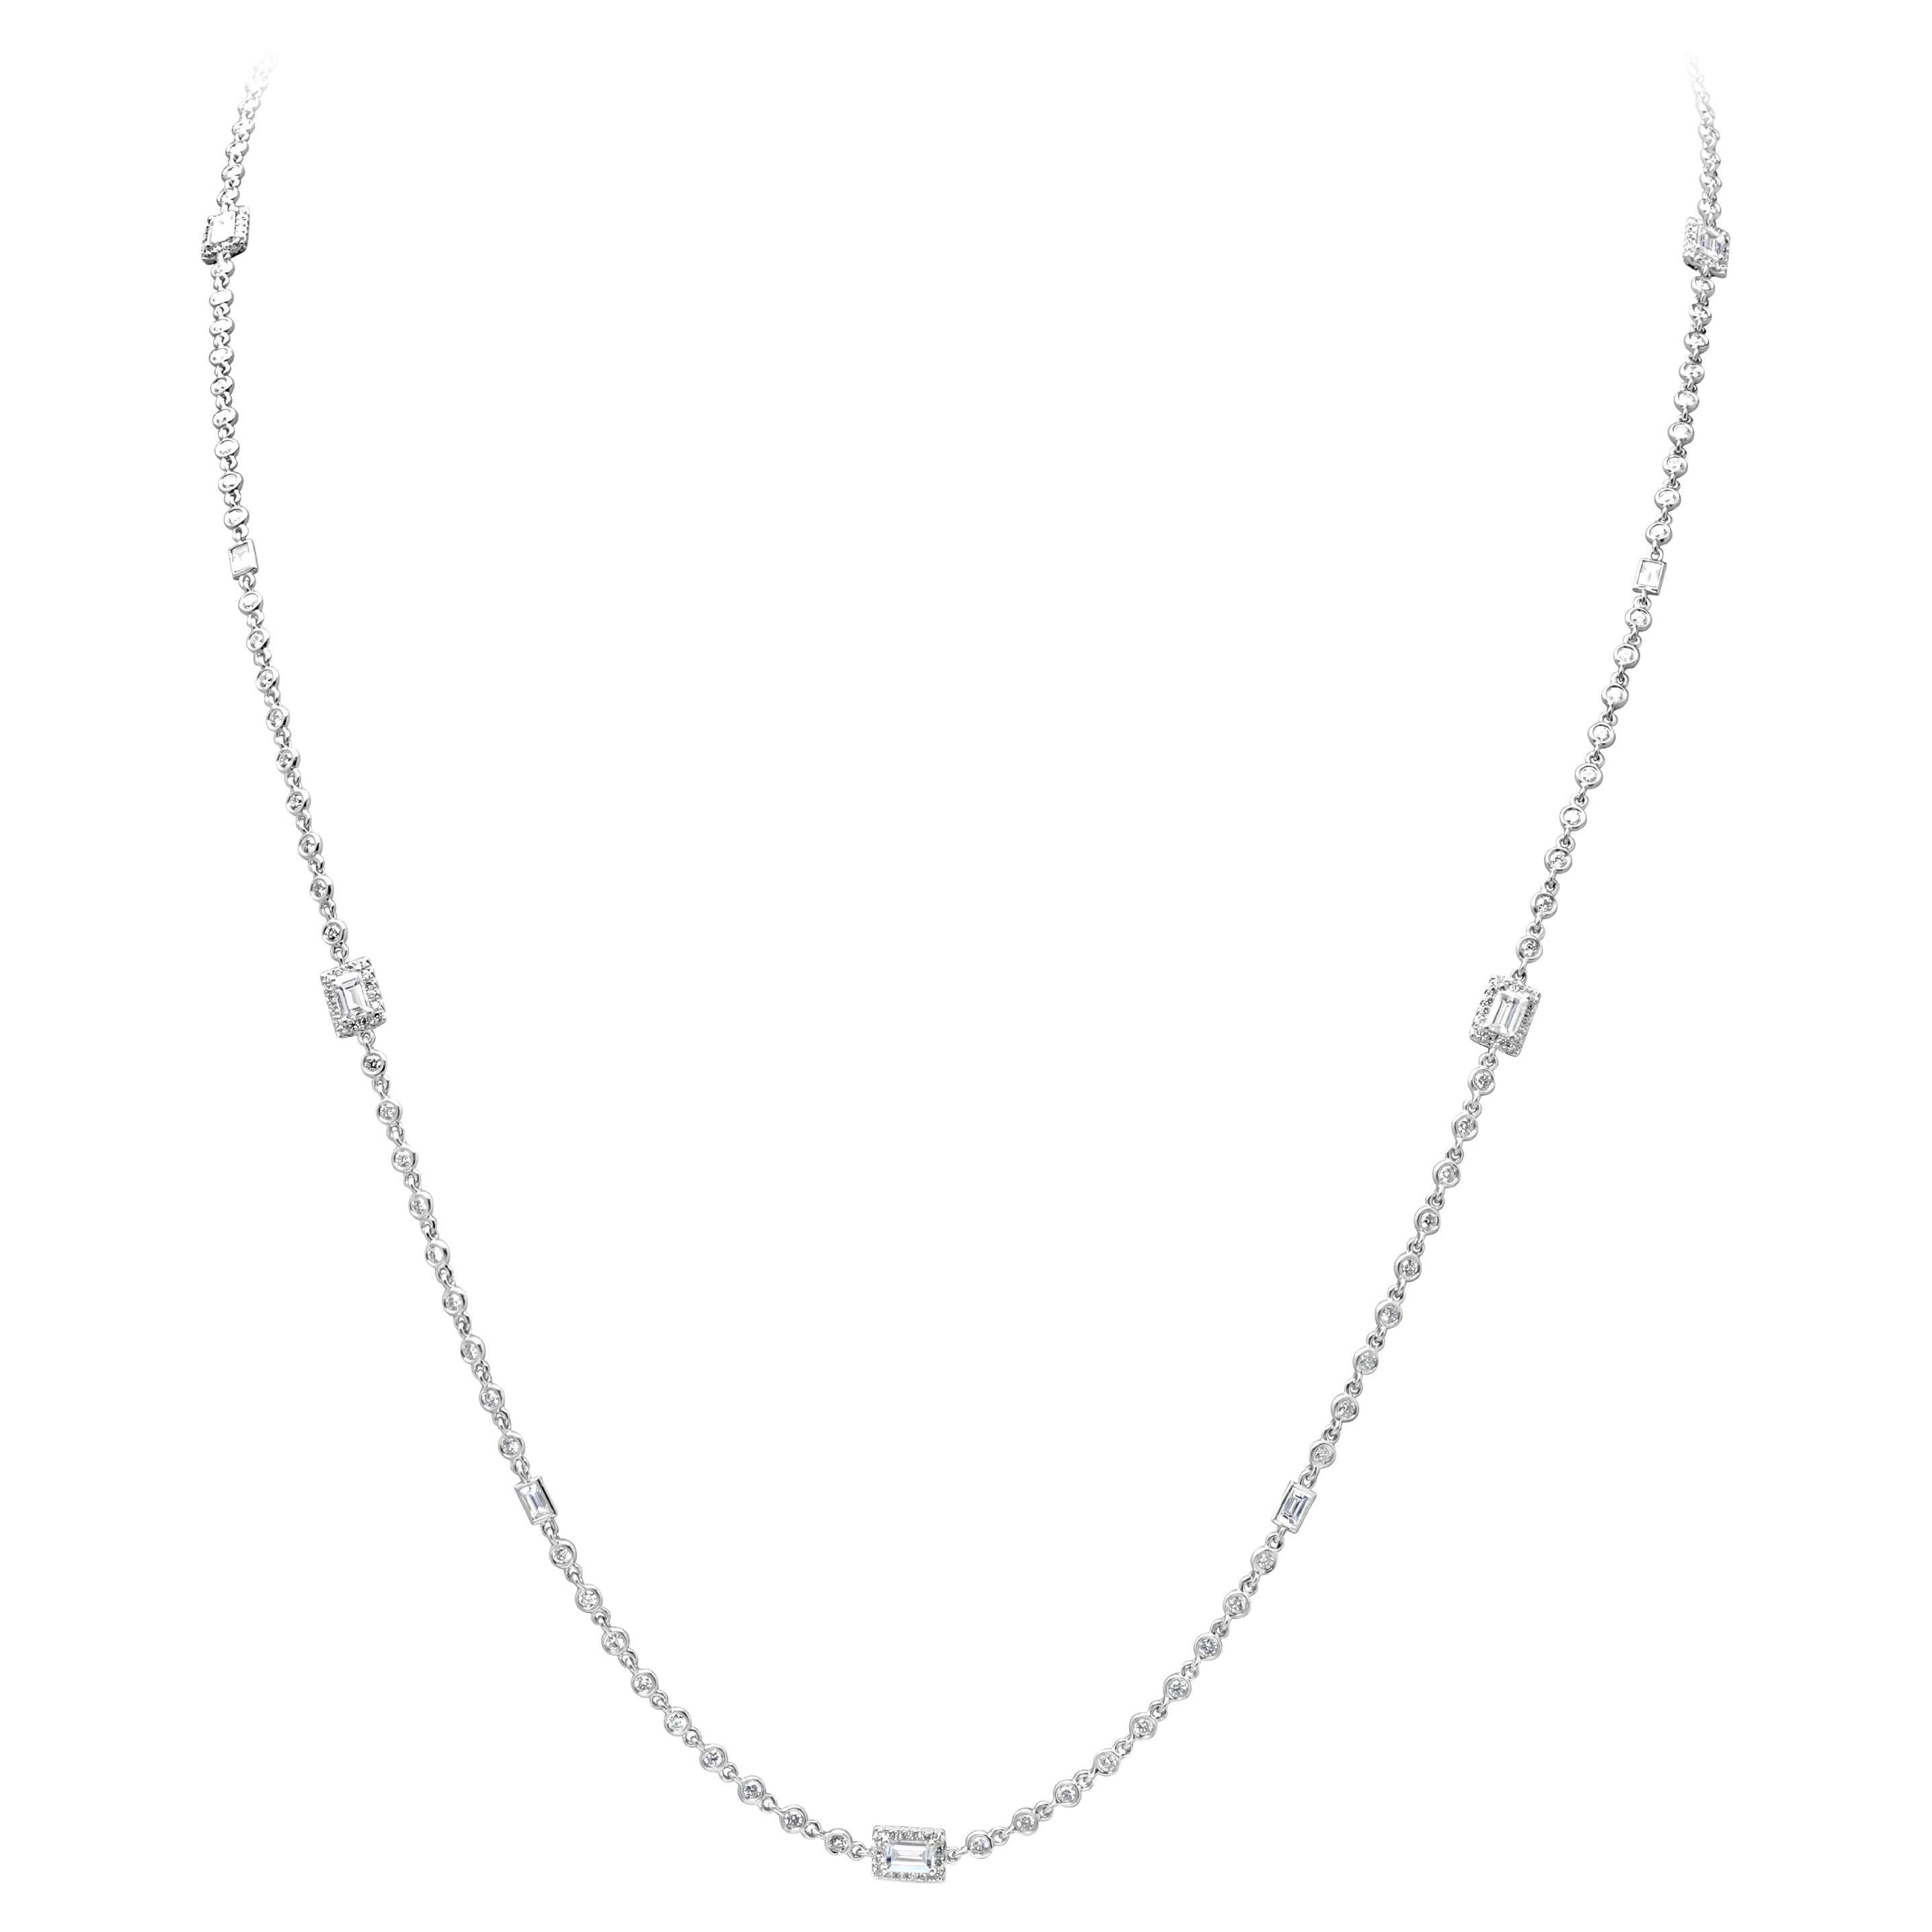 6.54 Carats Total Baguette and Round Cut Diamonds by the Yard Line Necklace